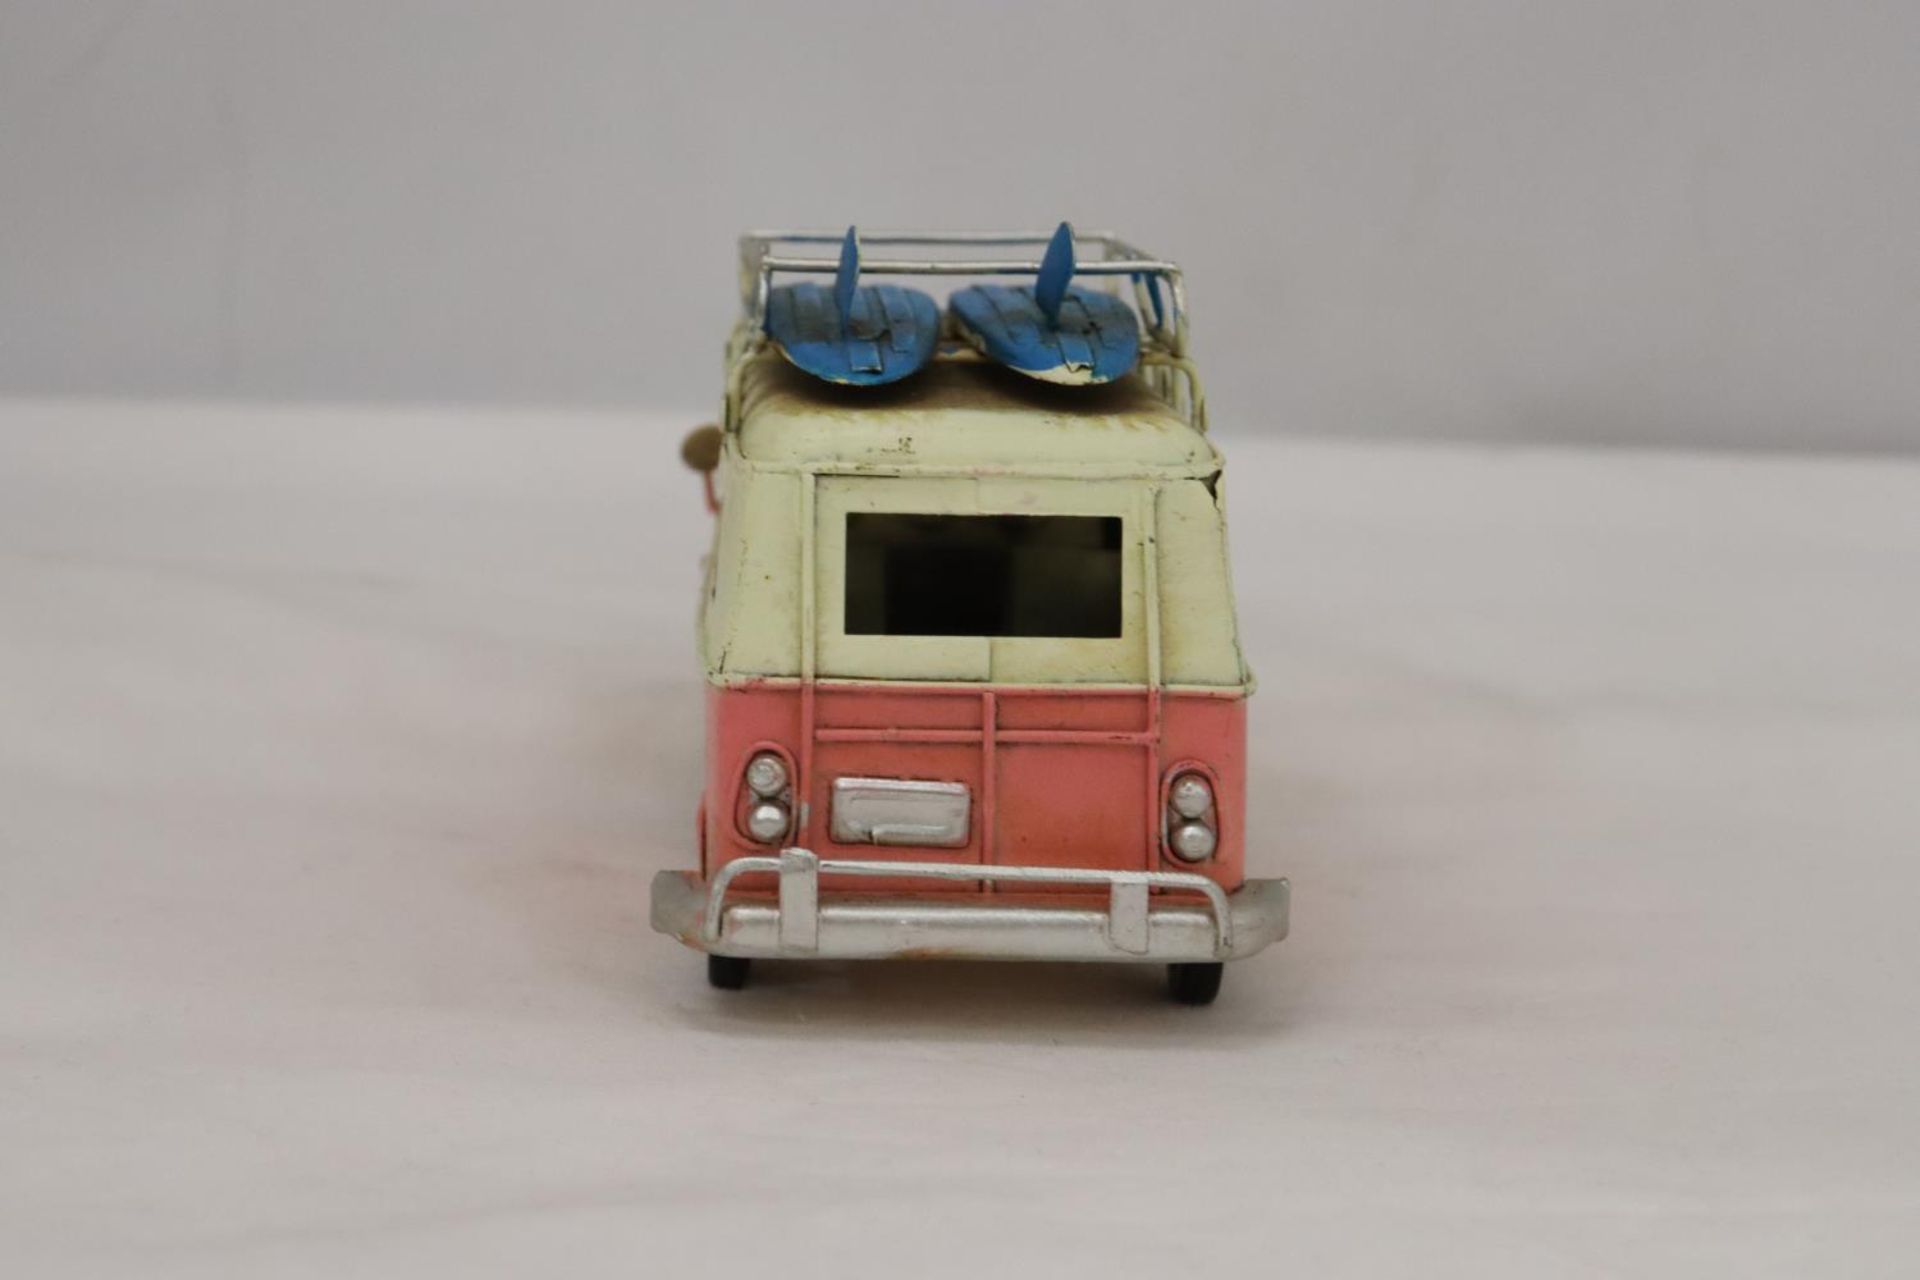 A TIN PLATE VOLKSWAGON SURFING CAMPER VAN - Image 4 of 6